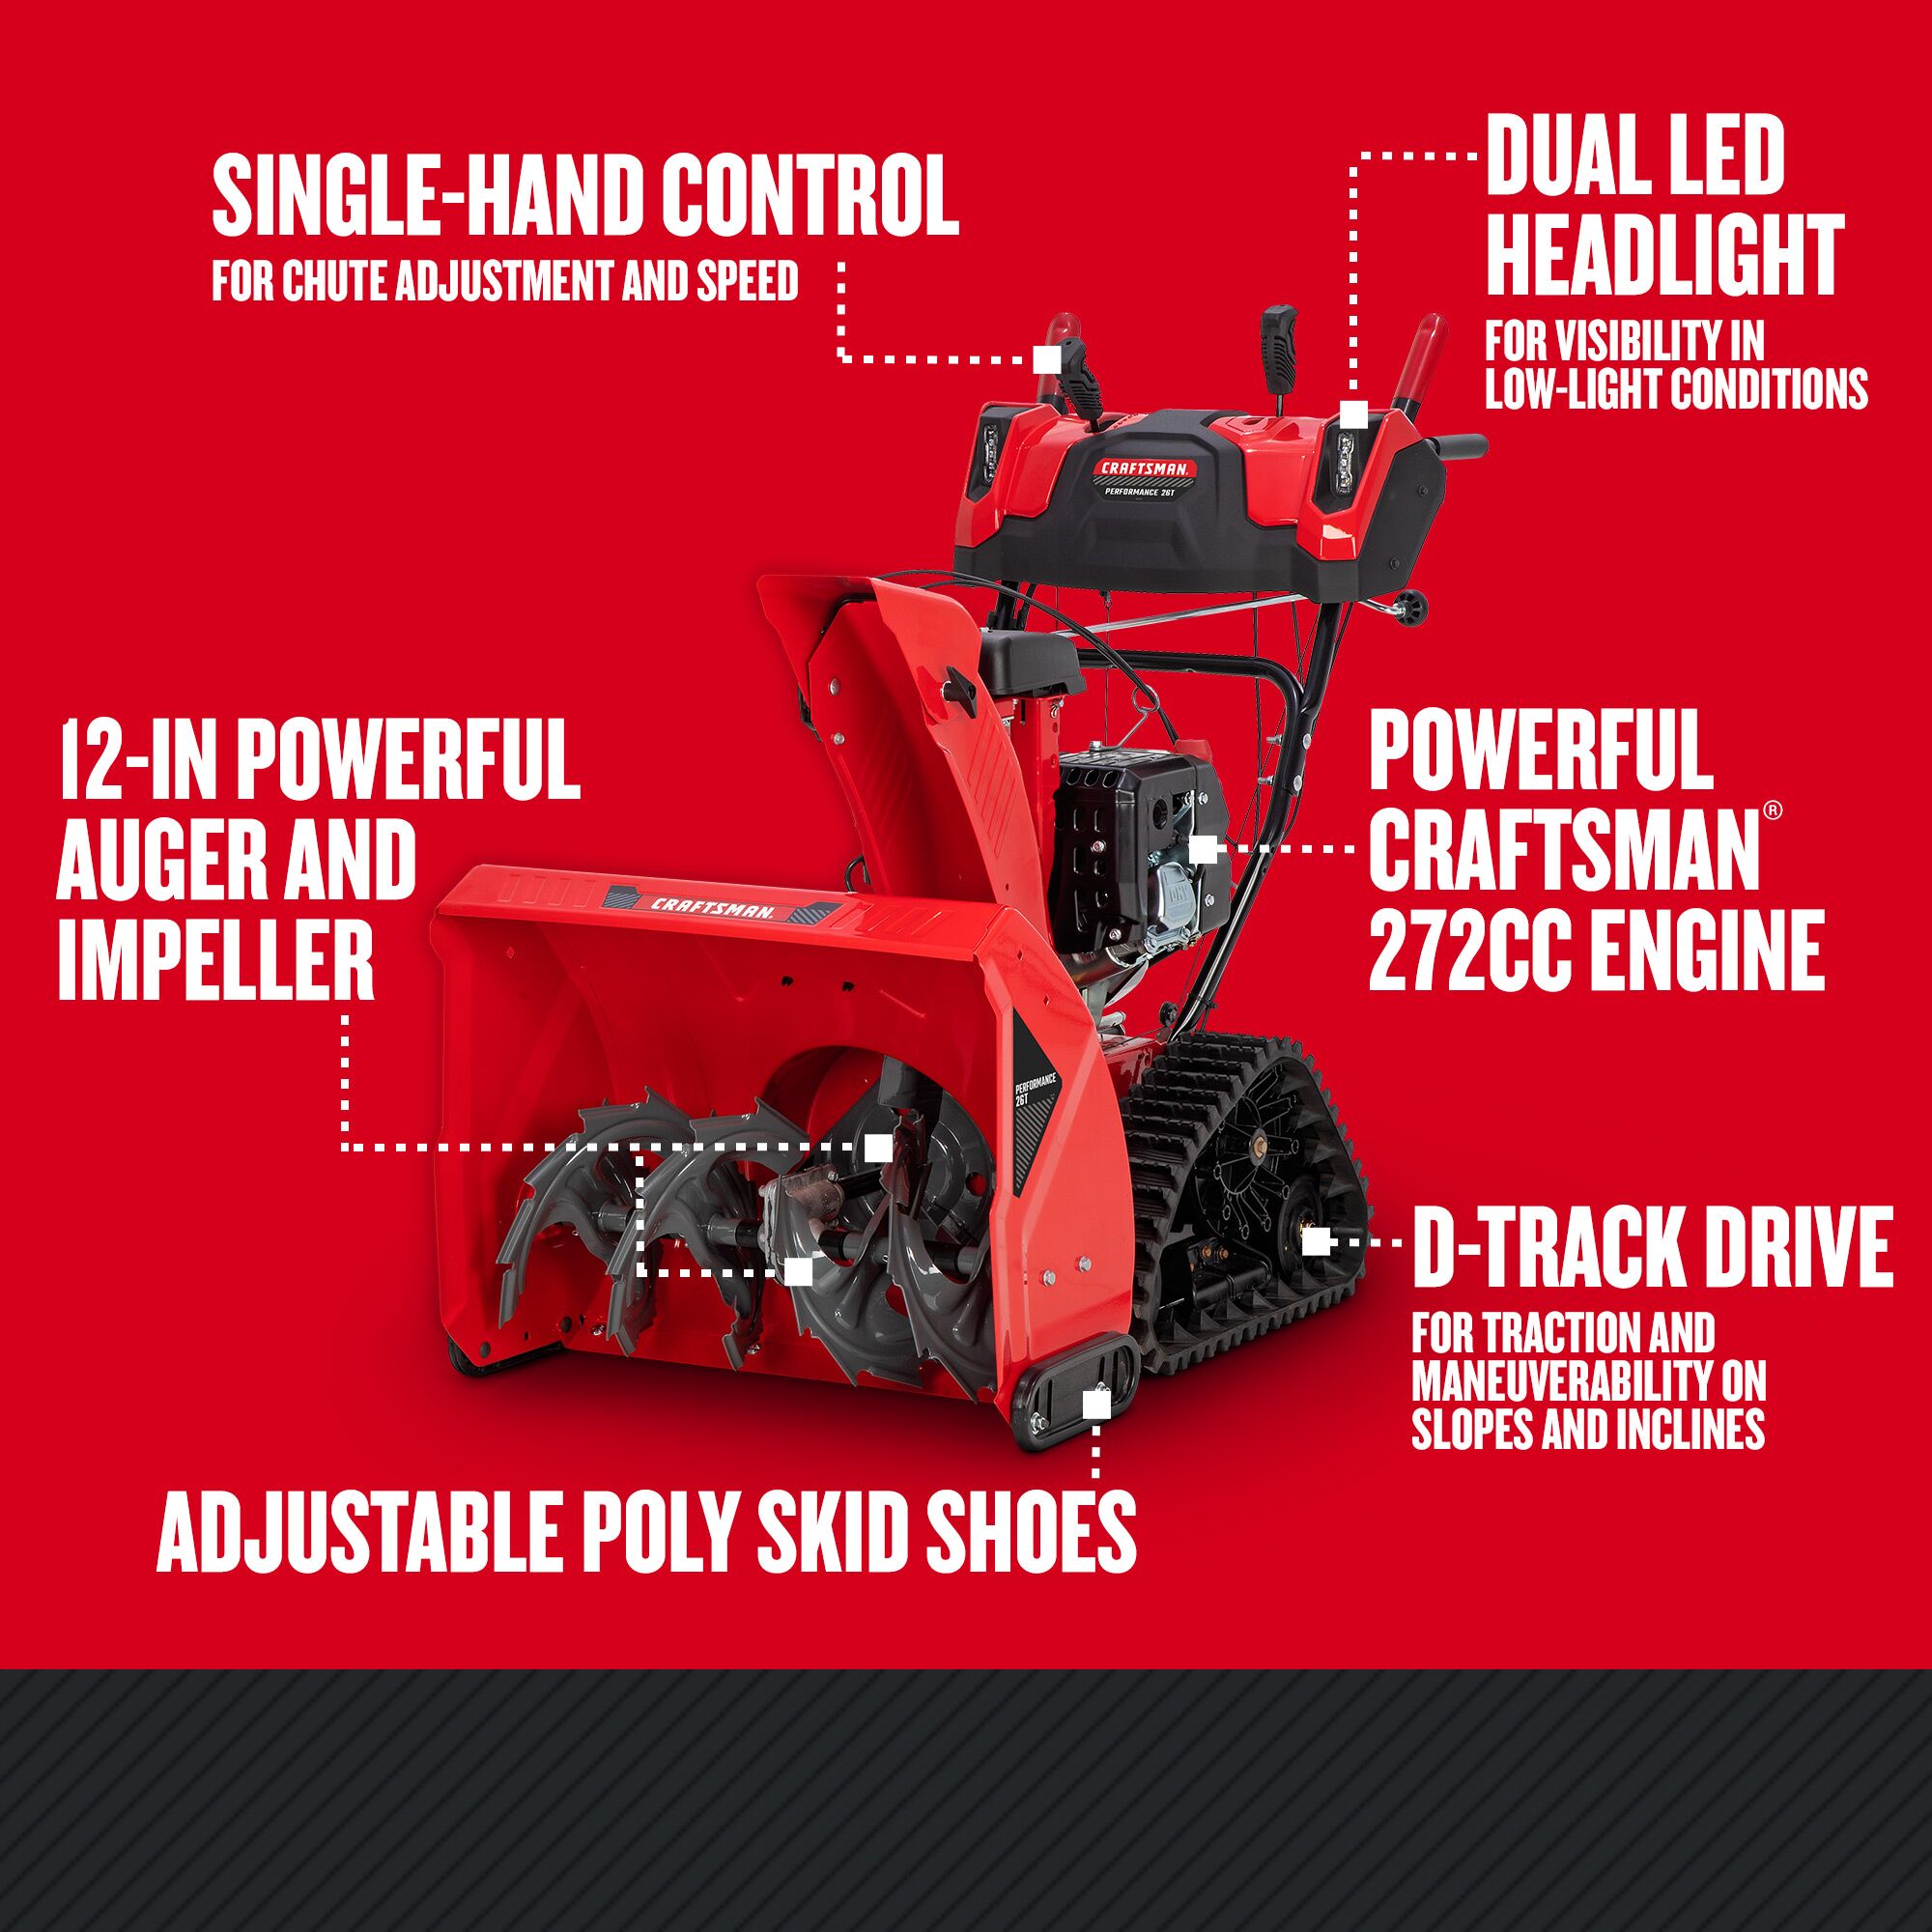 CRAFTSMAN 26-in. 243-cc Two-Stage Gas Snow Blower graphic highlighting key features